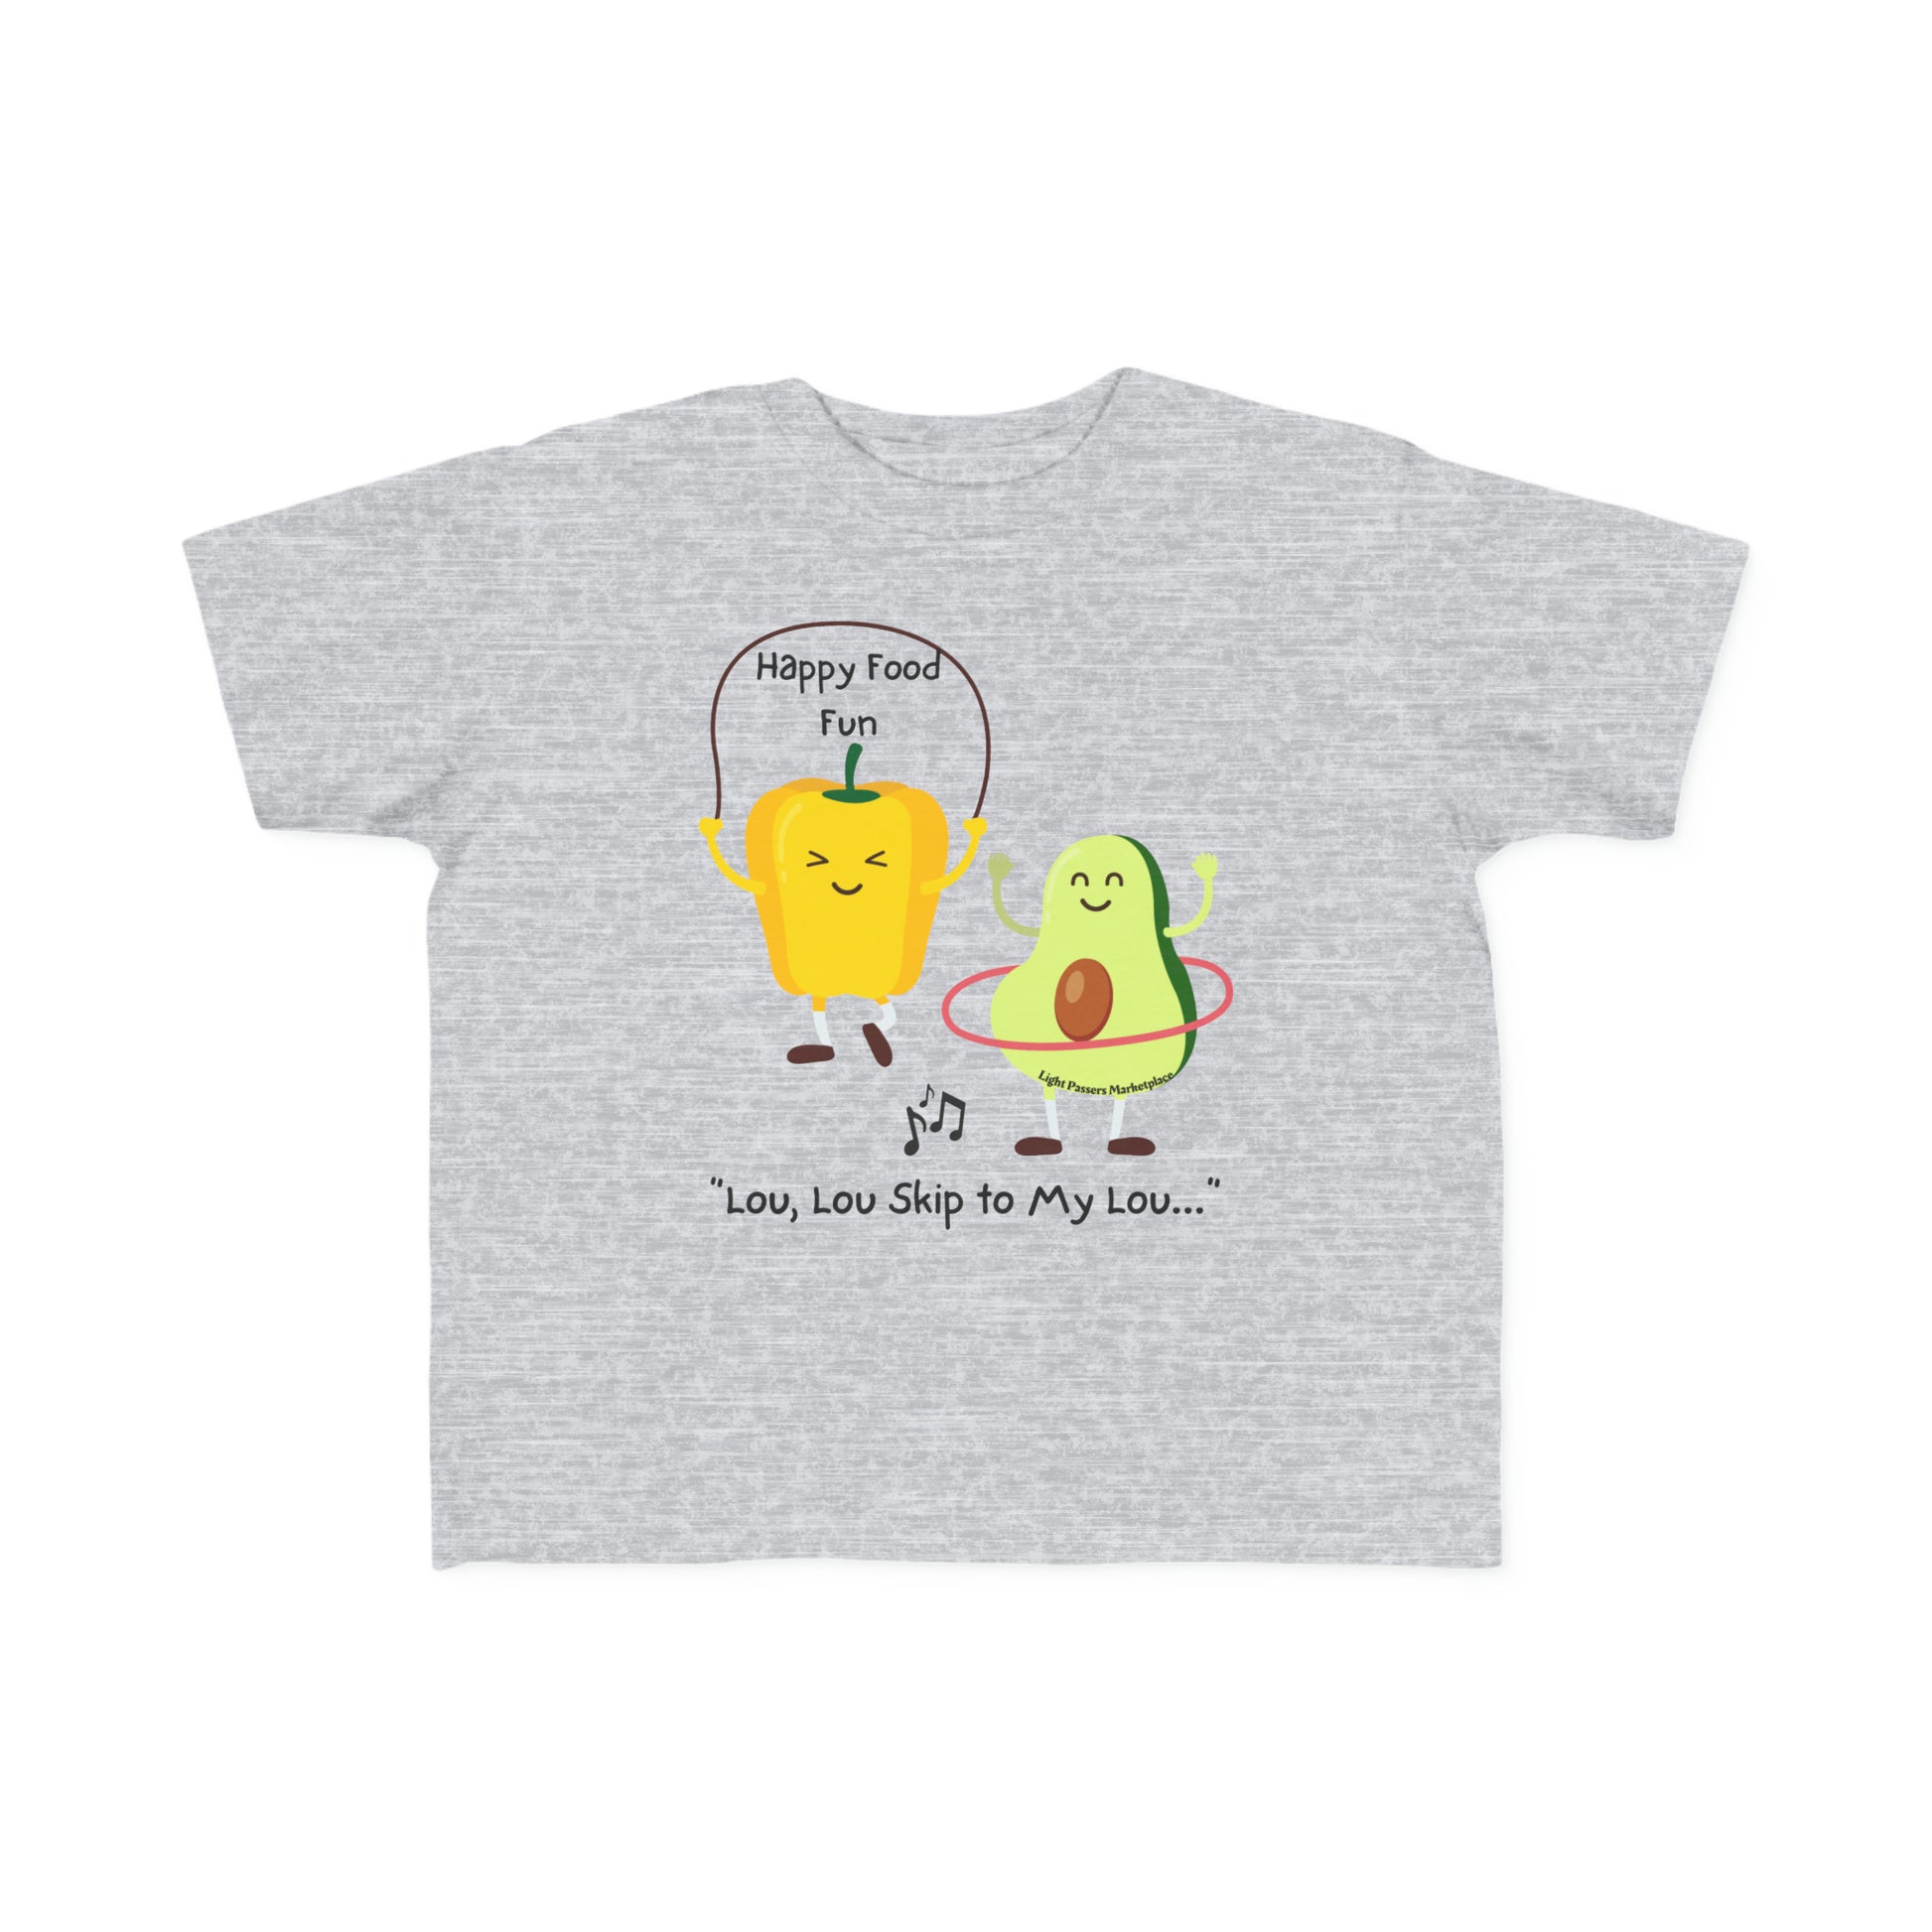 A Skip To My Lou Toddler T-shirt featuring cartoon avocado and pepper characters skipping rope, made of soft 100% combed cotton with a durable print. Ideal for sensitive skin, light fabric, tear-away label, classic fit.